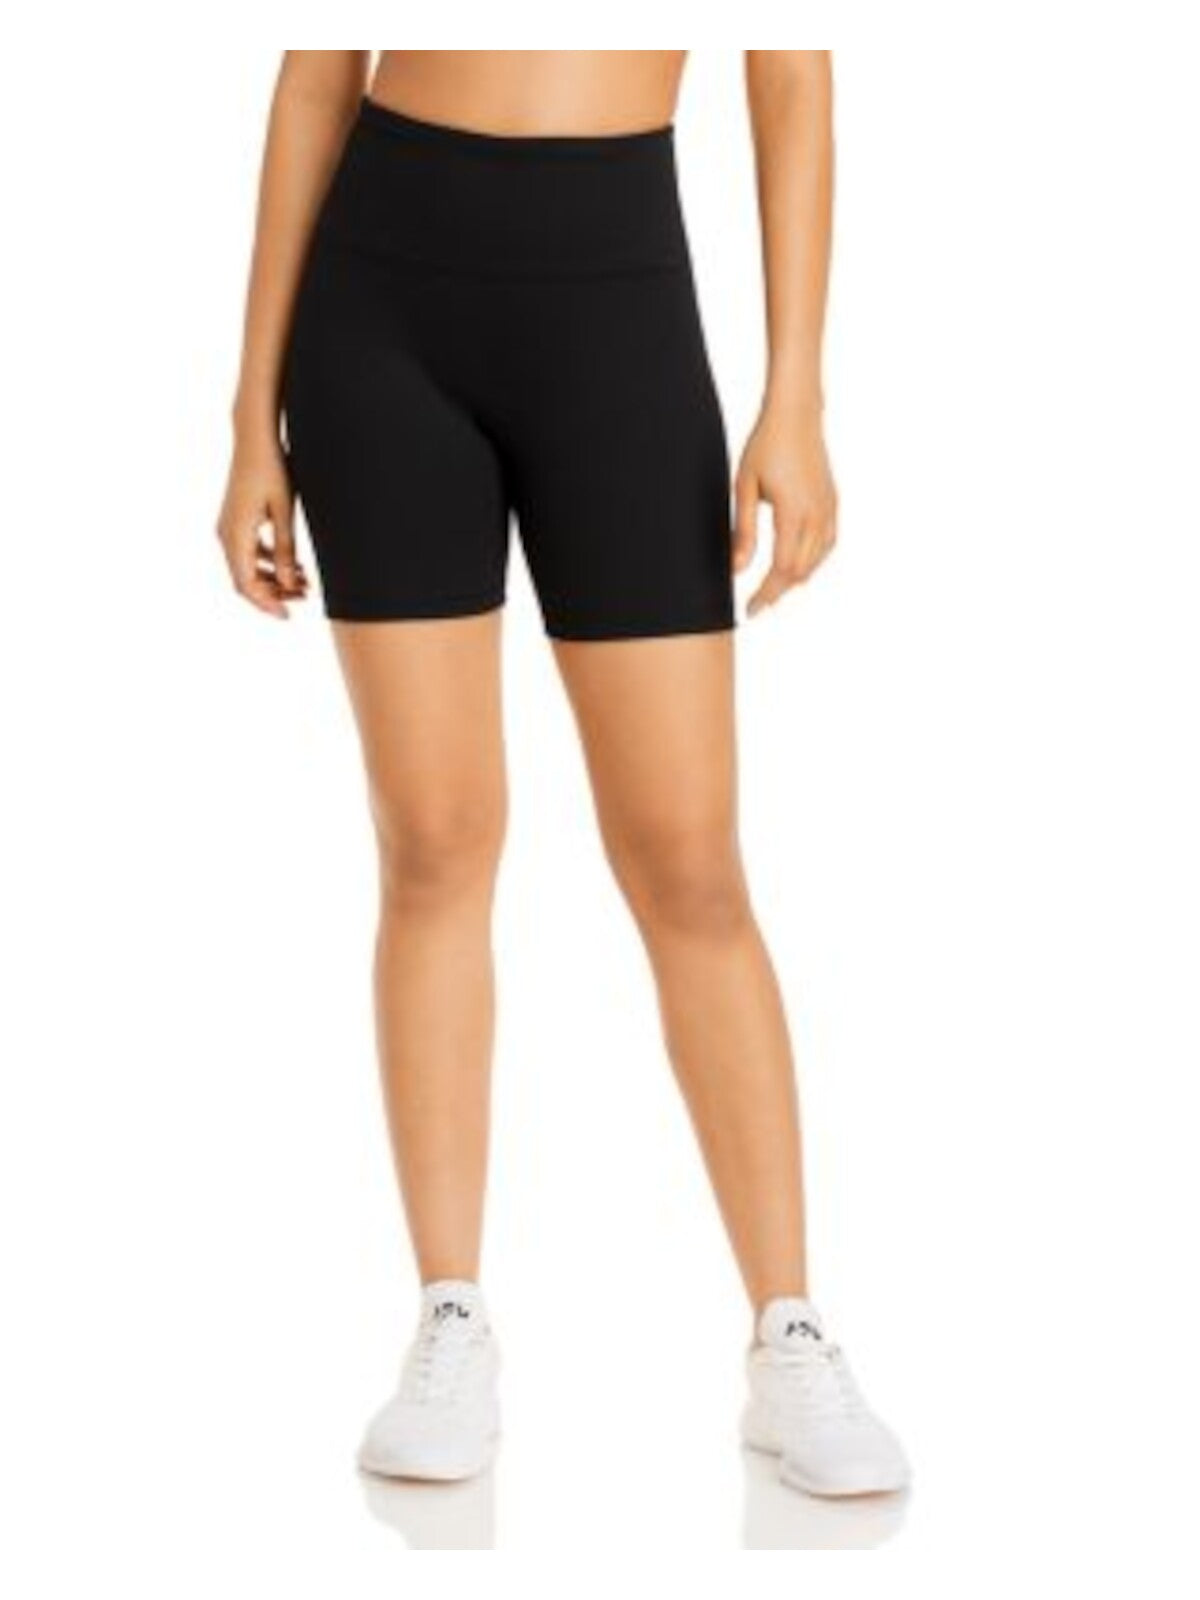 SOLID & STRIPED Womens Black Stretch Ribbed Fitted Bike Active Wear High Waist Shorts XS